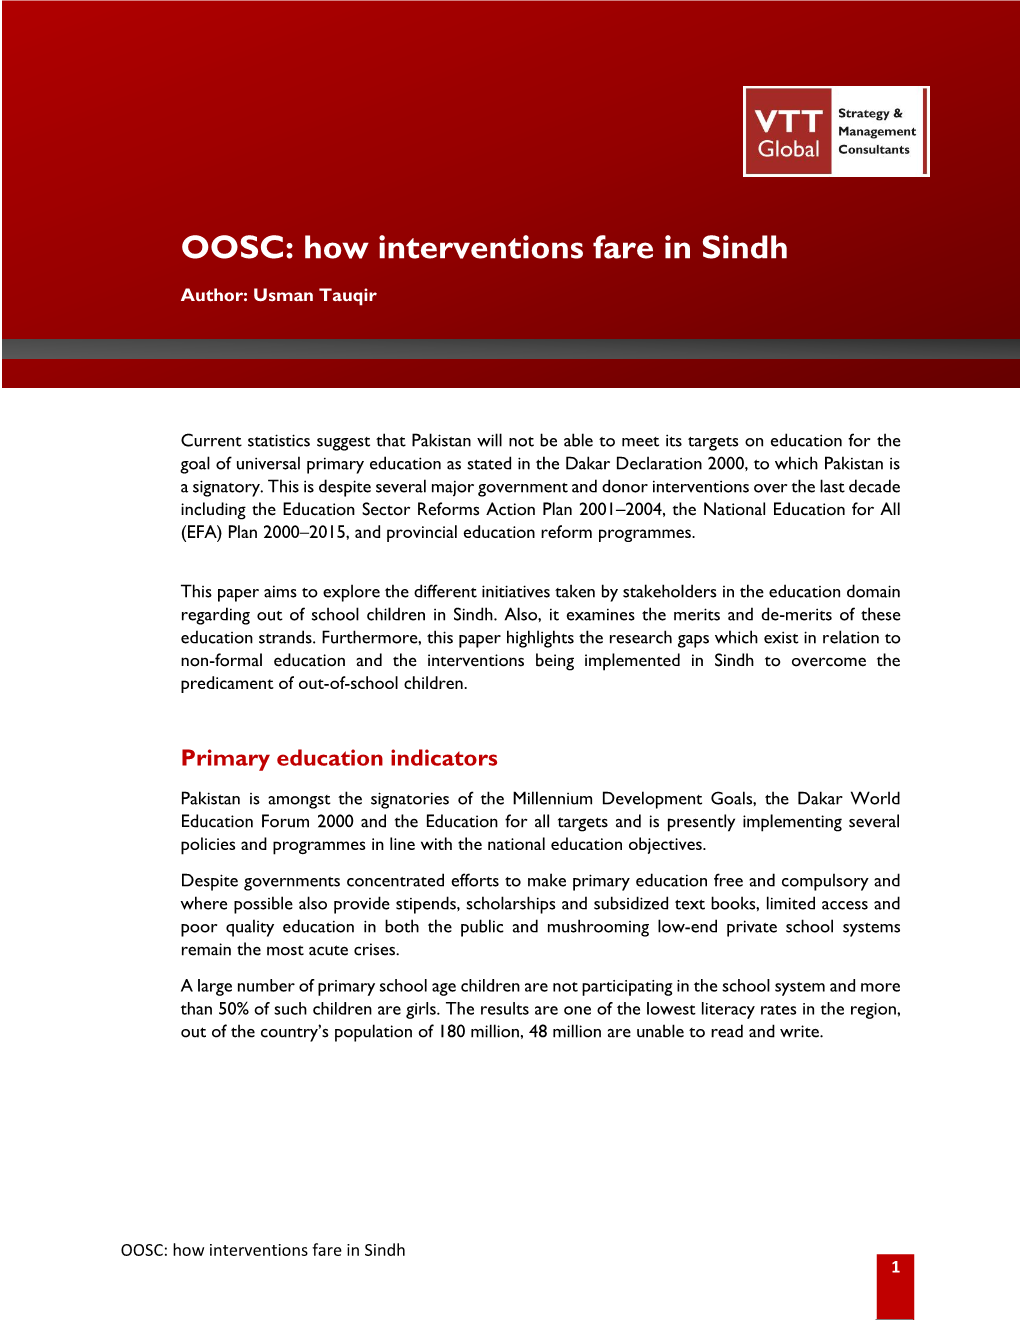 OOSC: How Interventions Fare in Sindh